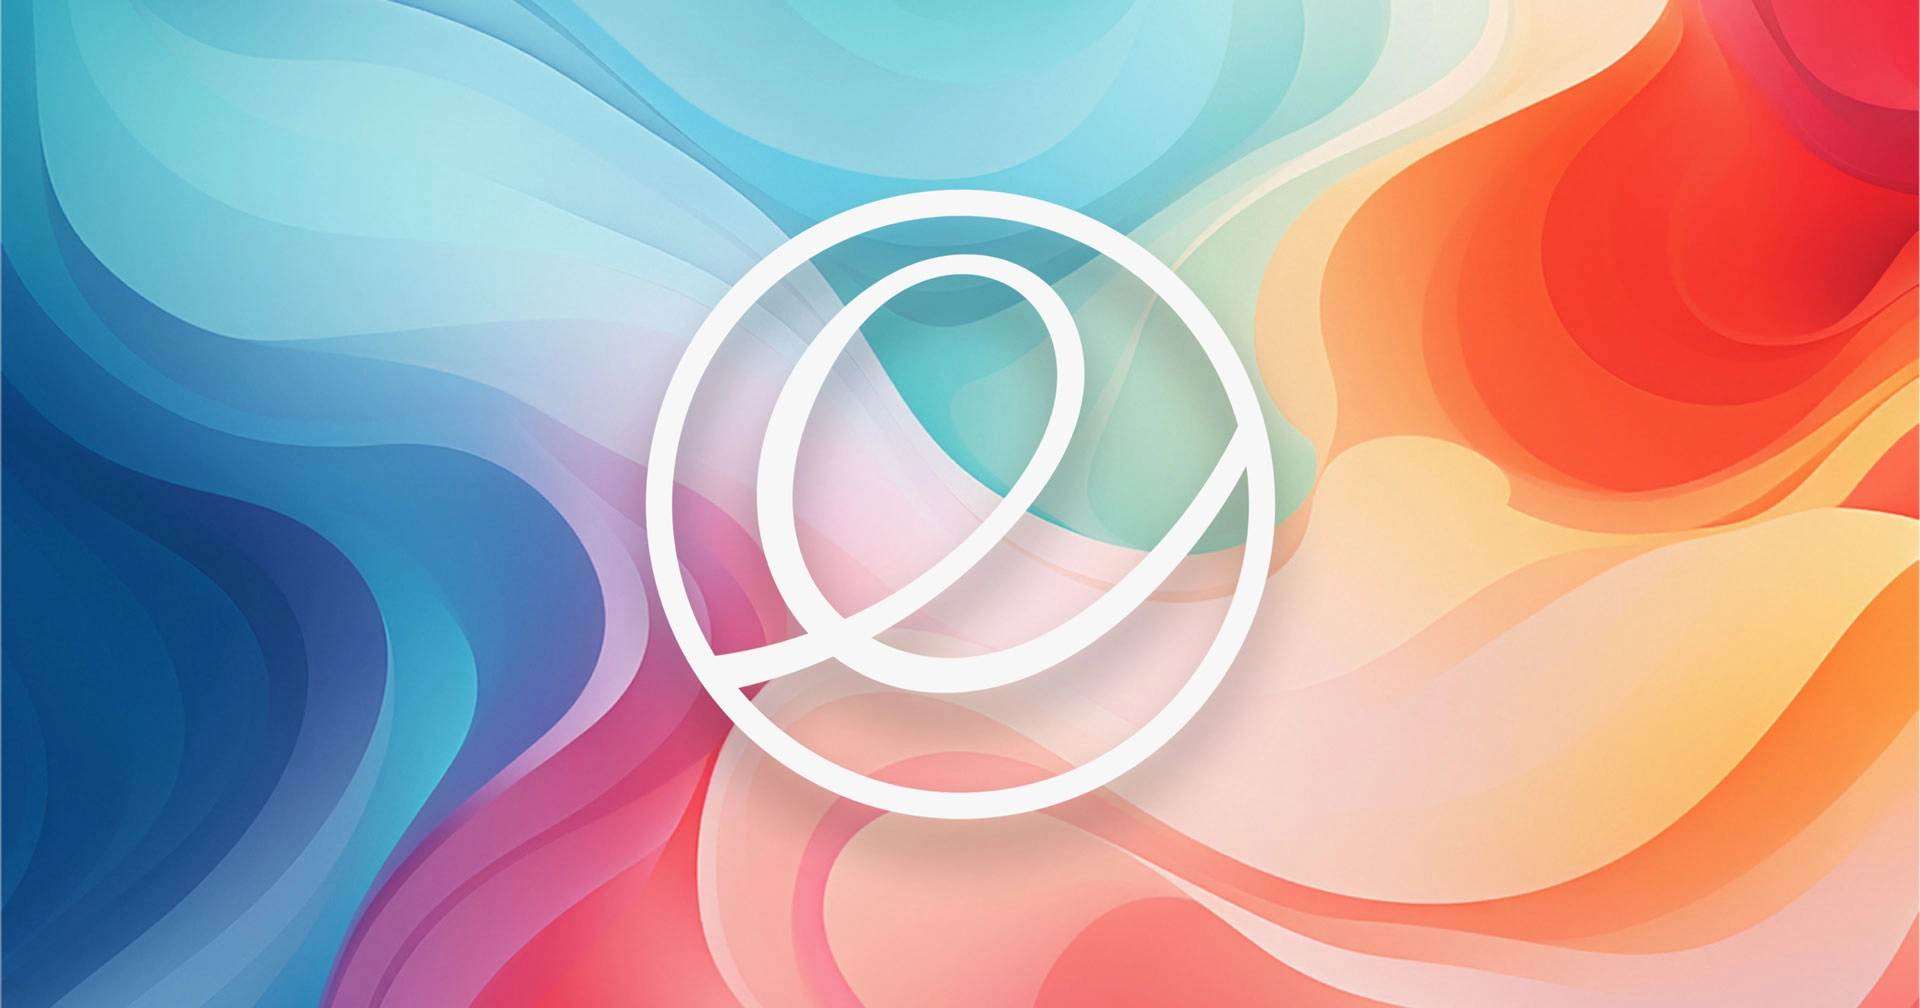 Elementary OS 8 Enters Early Access: A Sneak Peek into the Planned Features